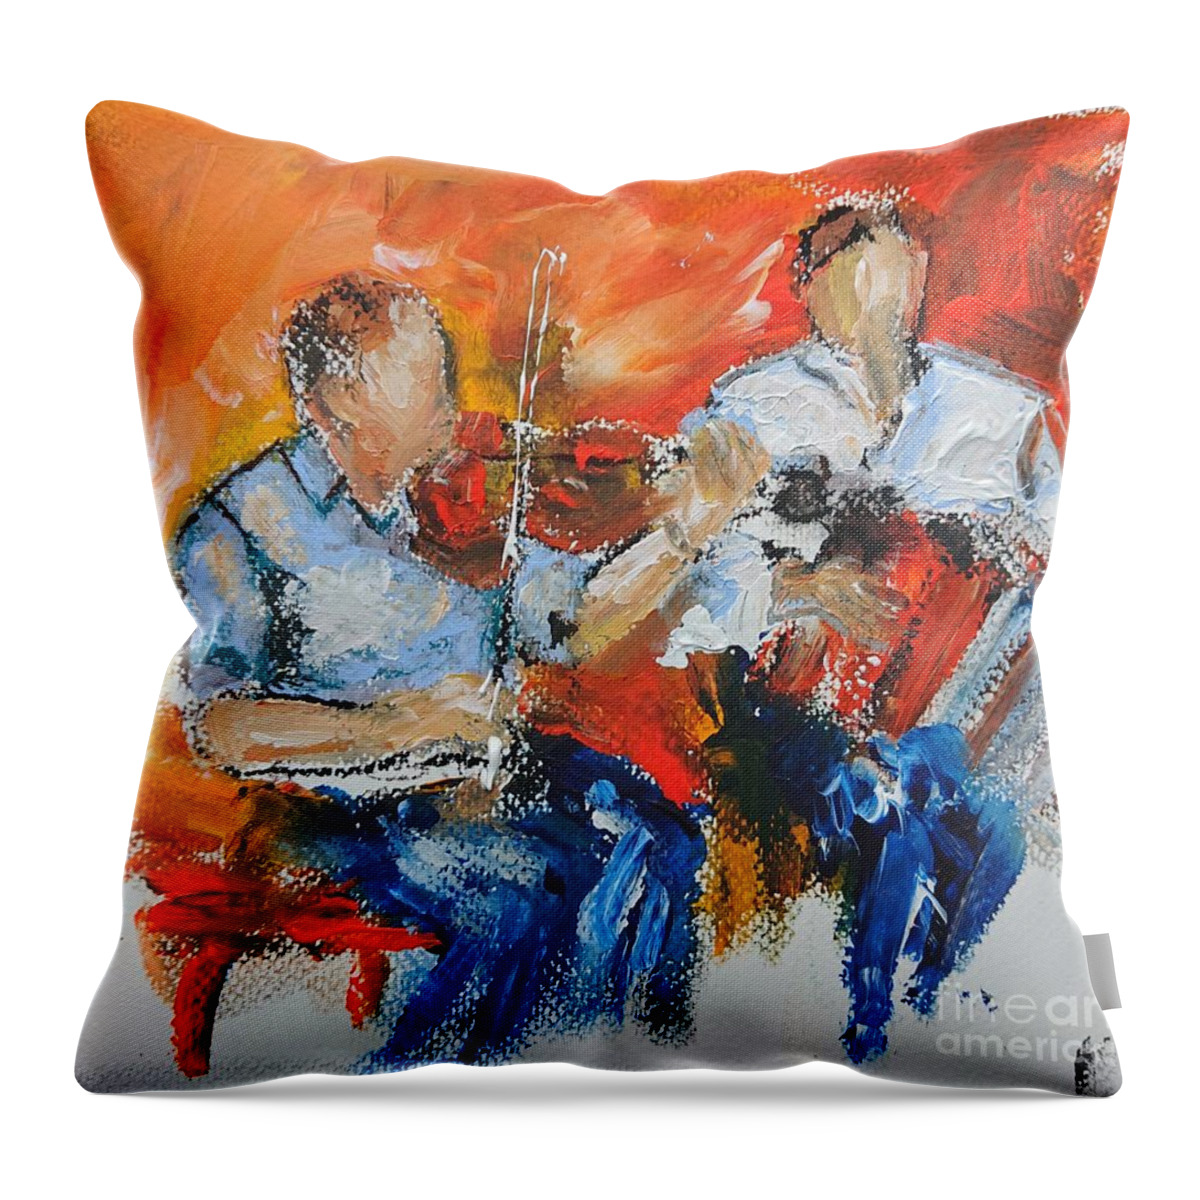 Galway Ireland Throw Pillow featuring the painting Traditional music paintings by Mary Cahalan Lee - aka PIXI